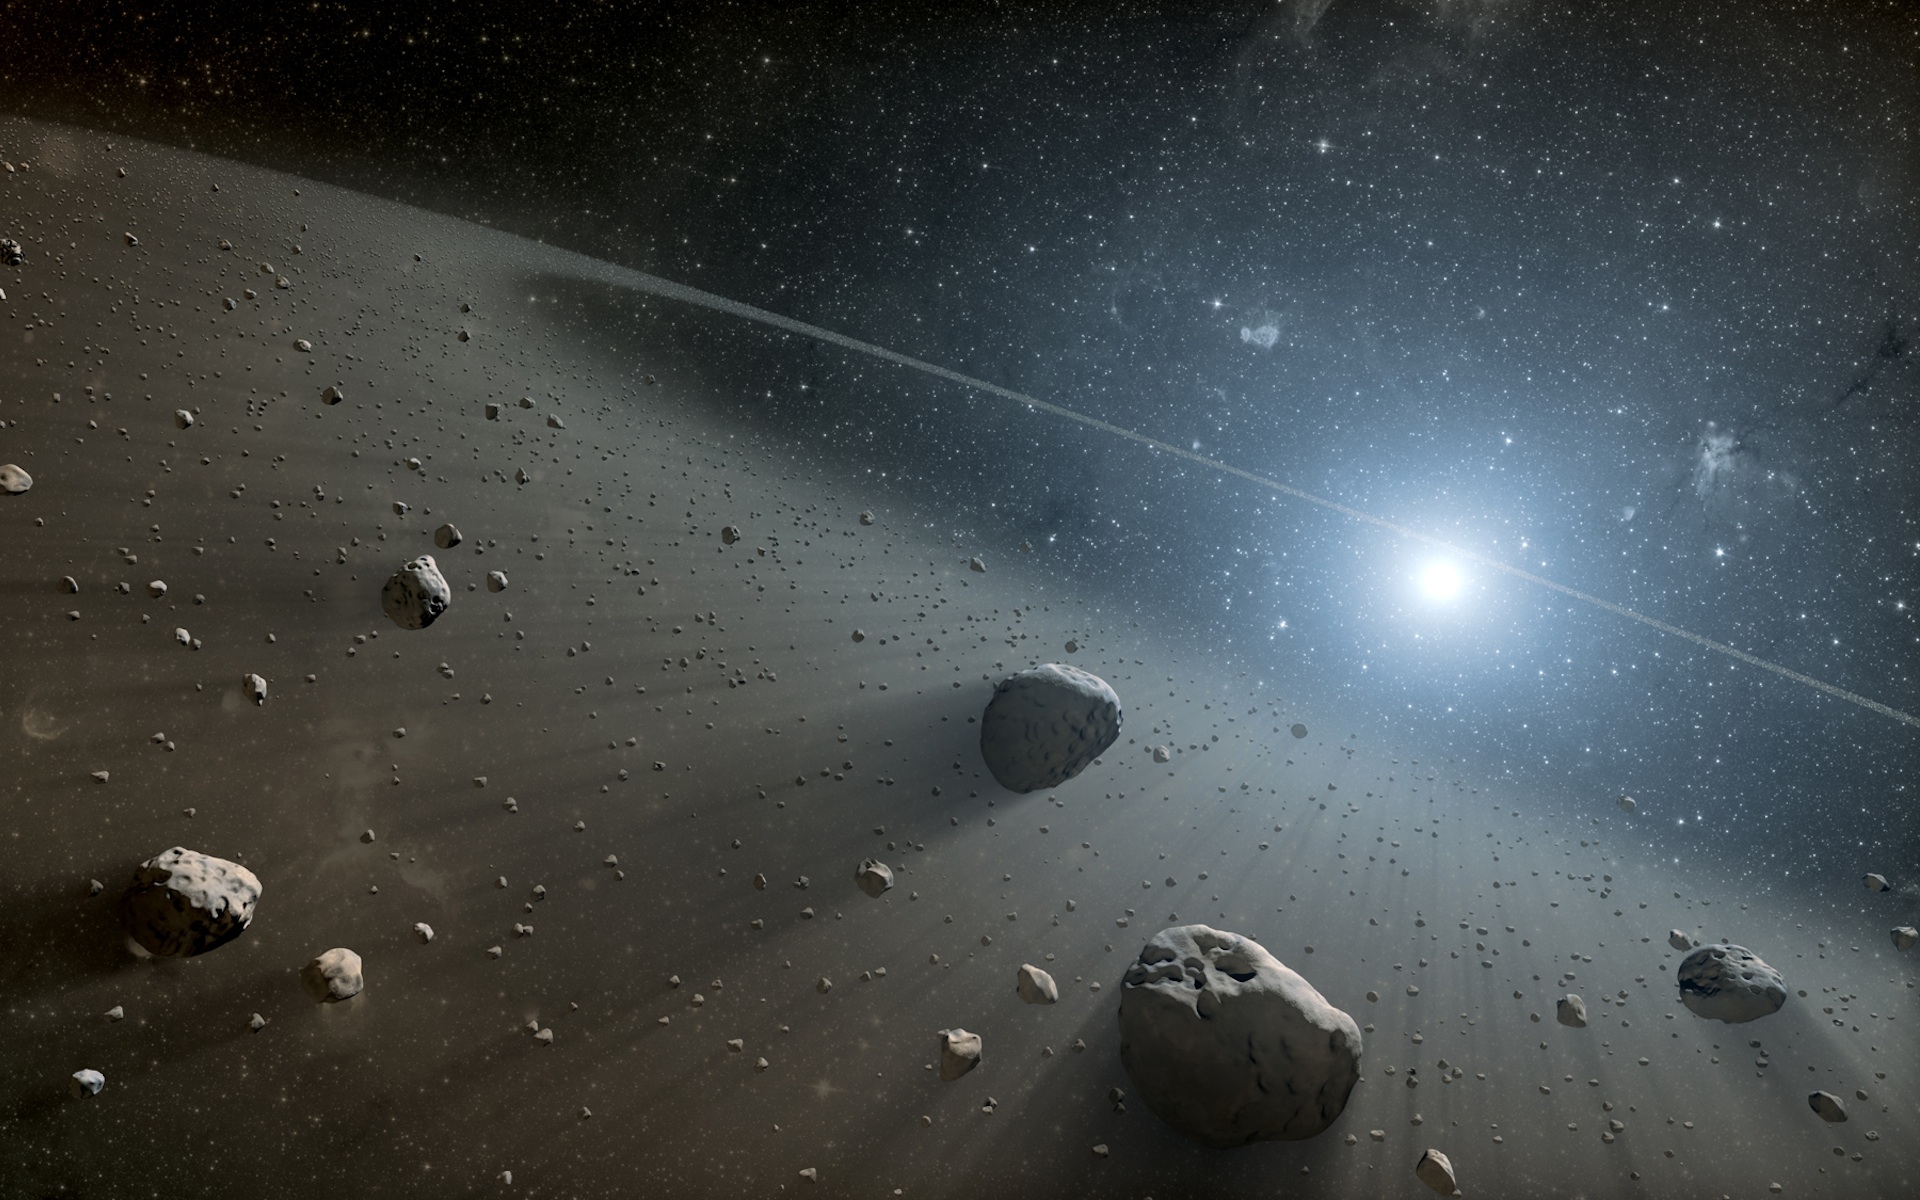 This artist's concept illustrates an asteroid belt with numerous asteroids and dust spread out around a distant star shining brightly.